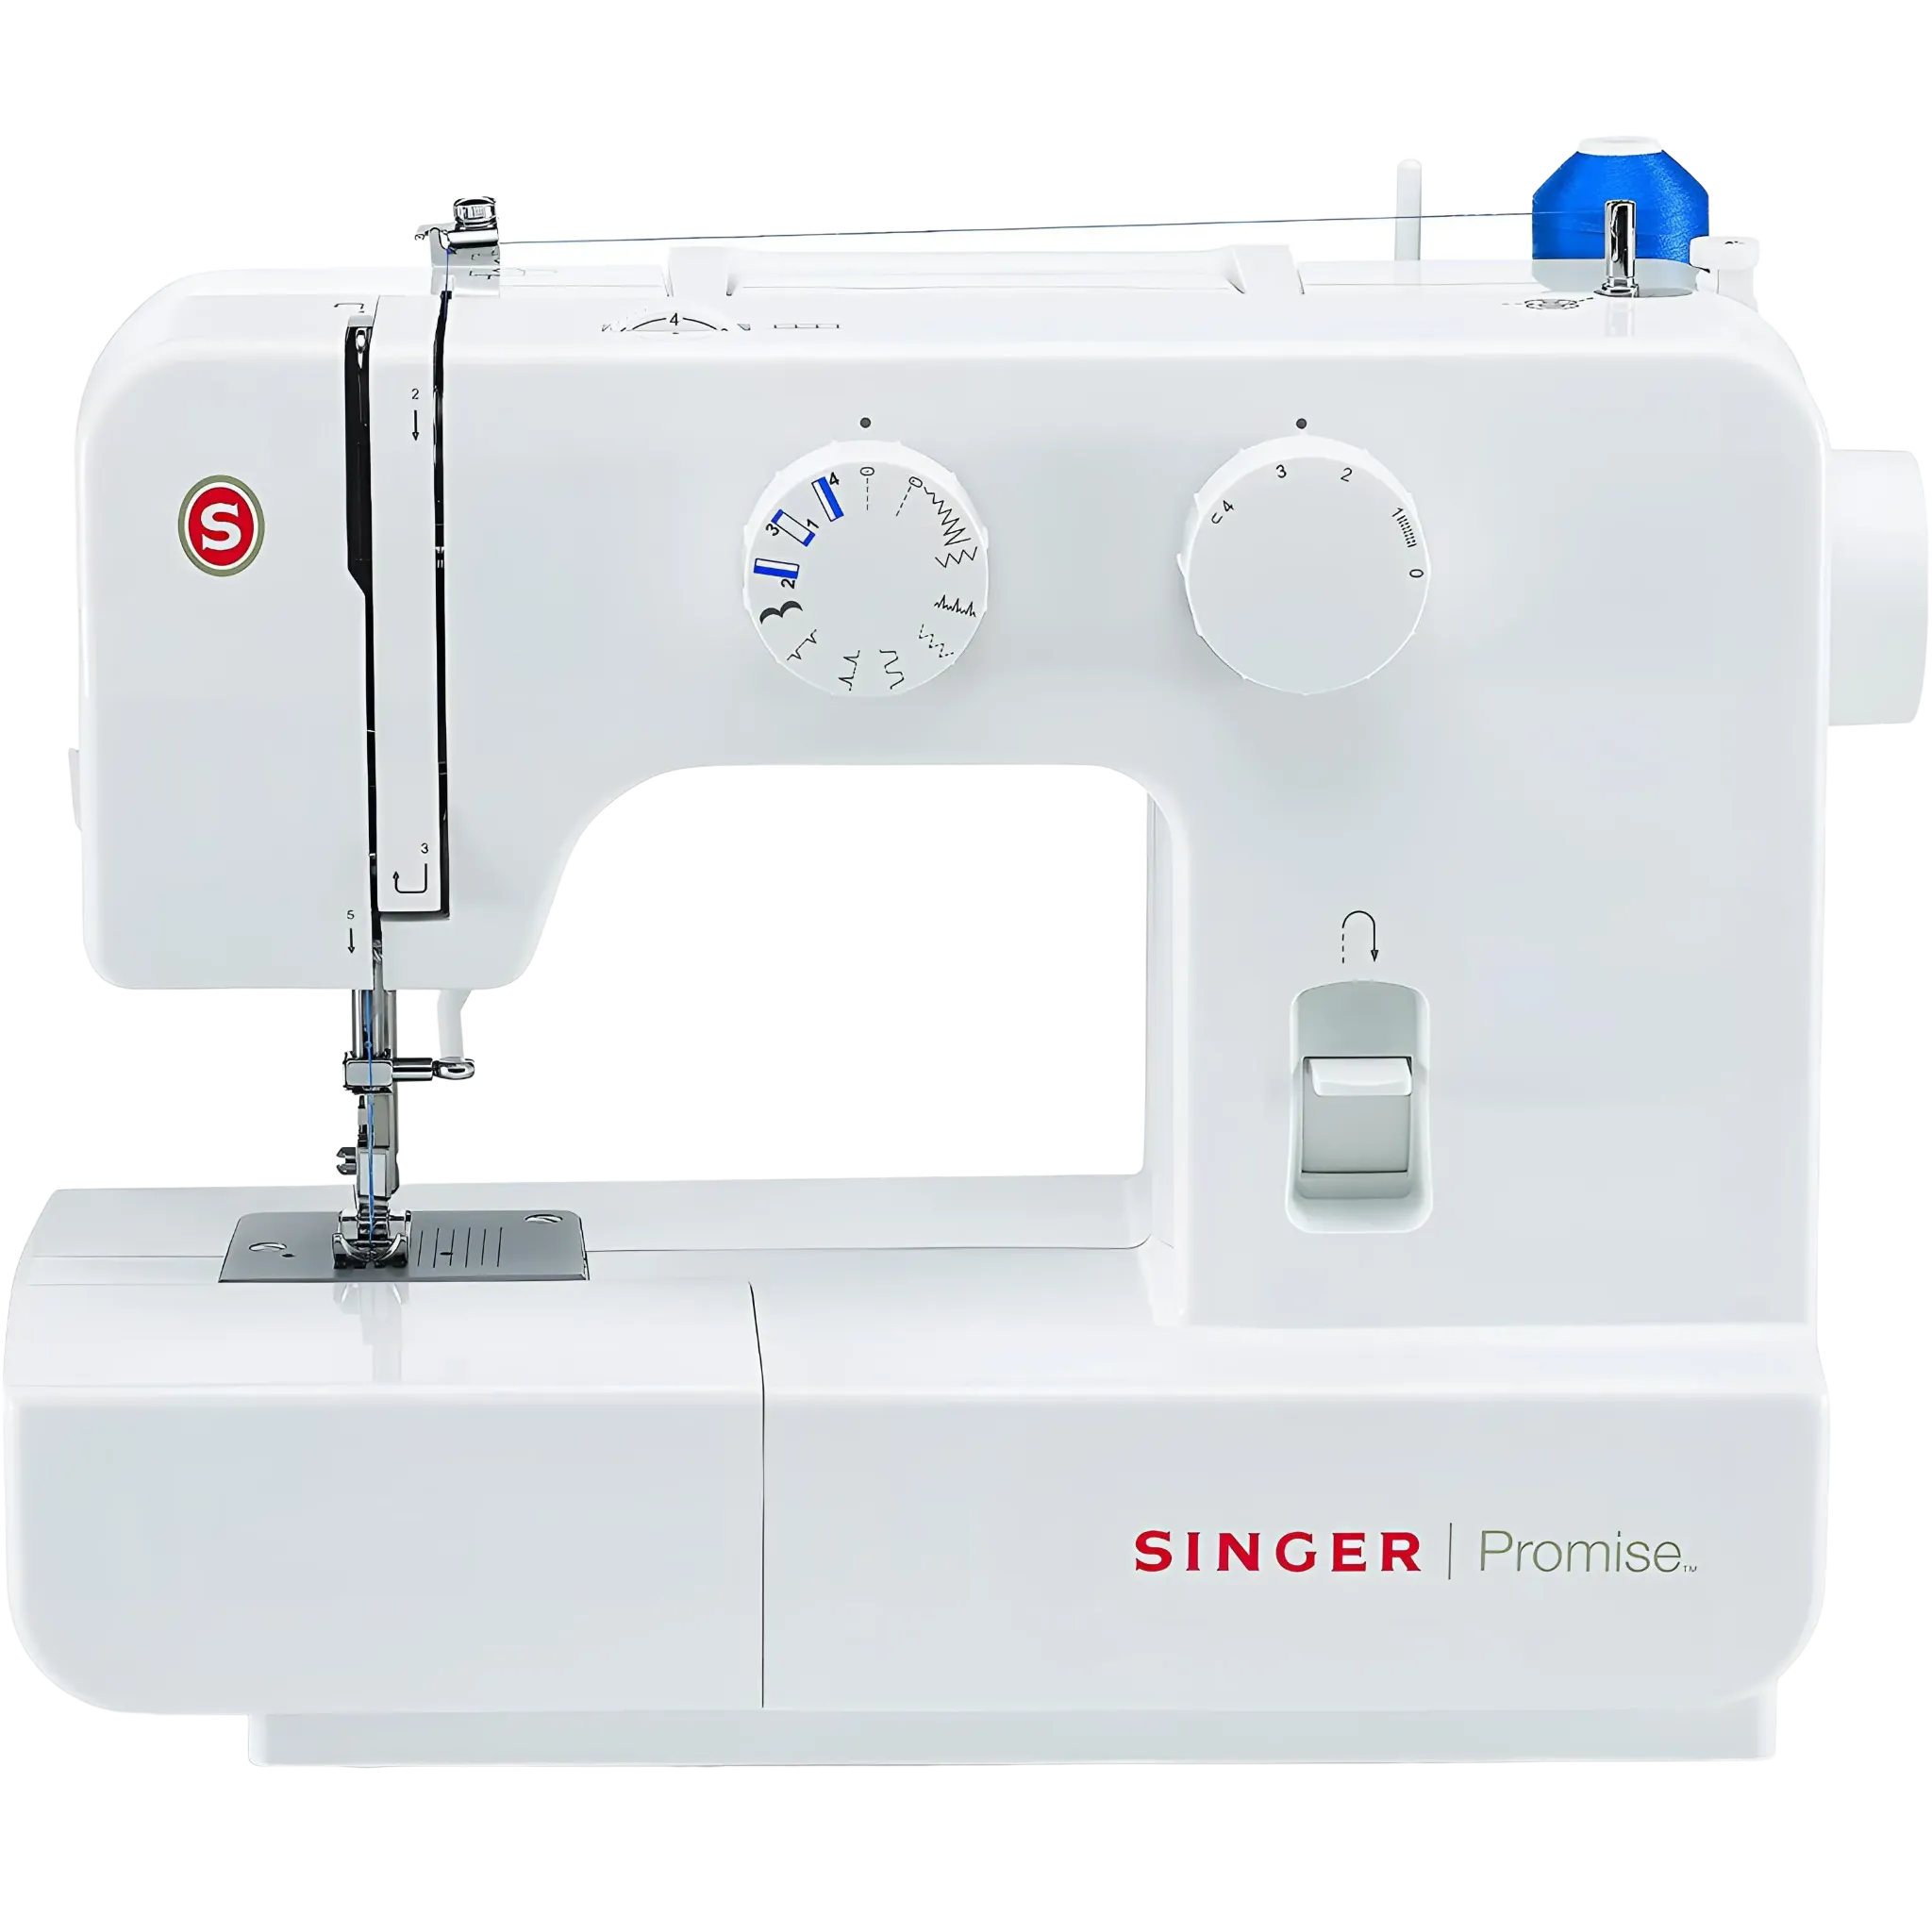 Singer Sewing Machine 9 Built-In Stitches With Automatic 4 Step Buttonhole Adjustable Stitch Length 1409 White